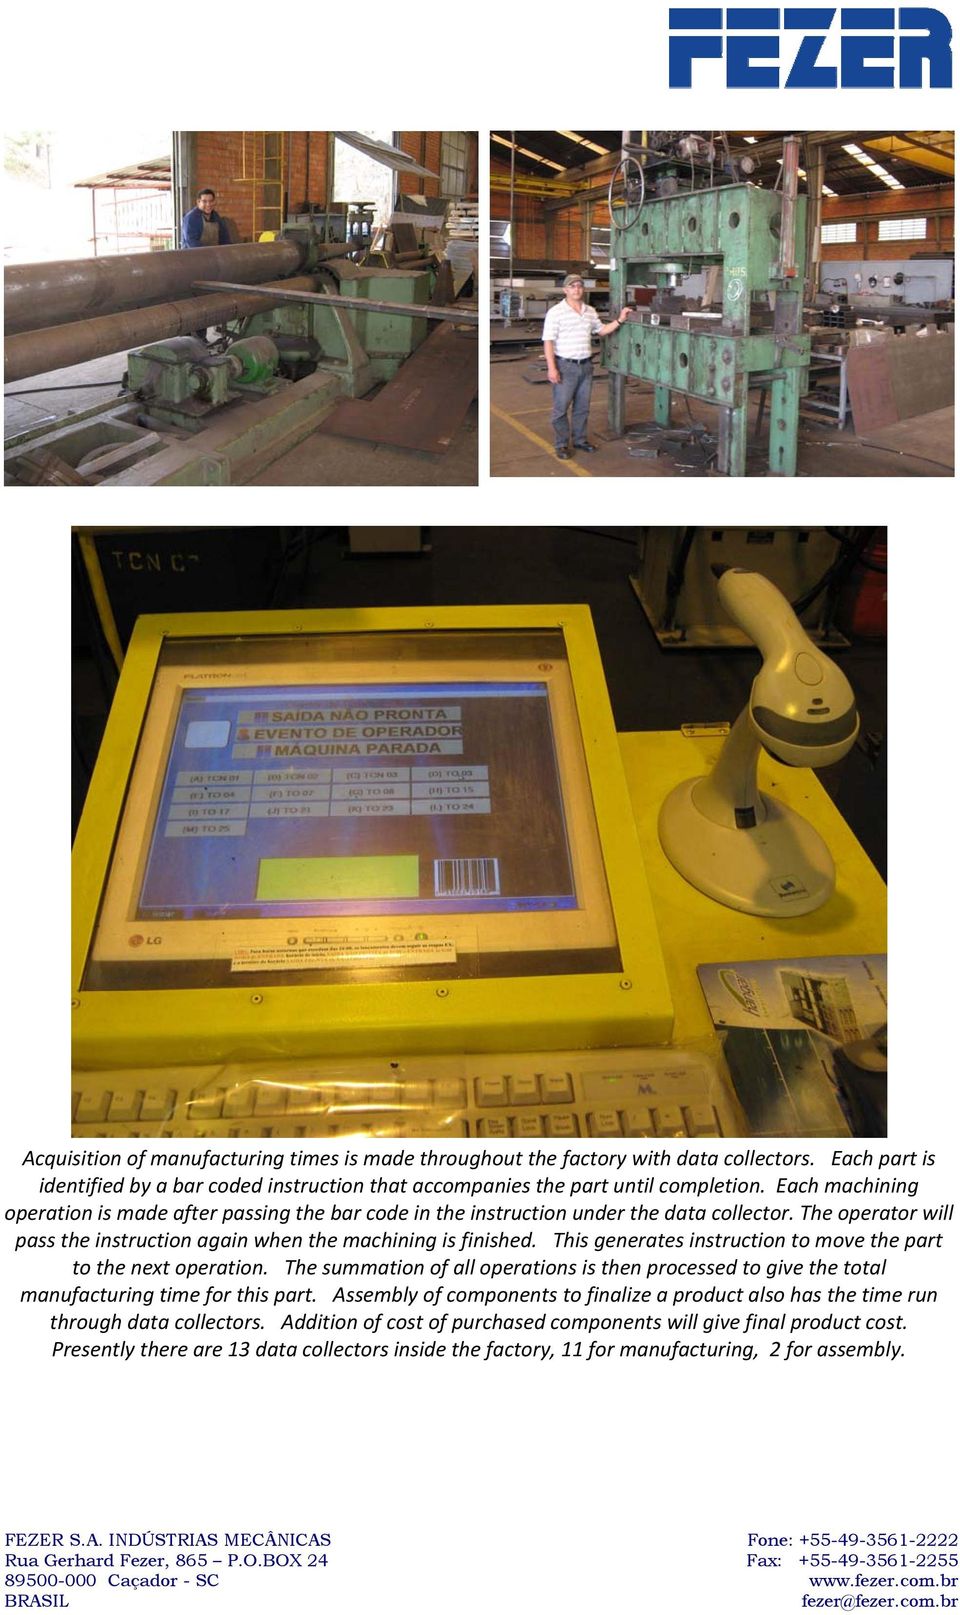 This generates instruction to move the part to the next operation. The summation of all operations is then processed to give the total manufacturing time for this part.